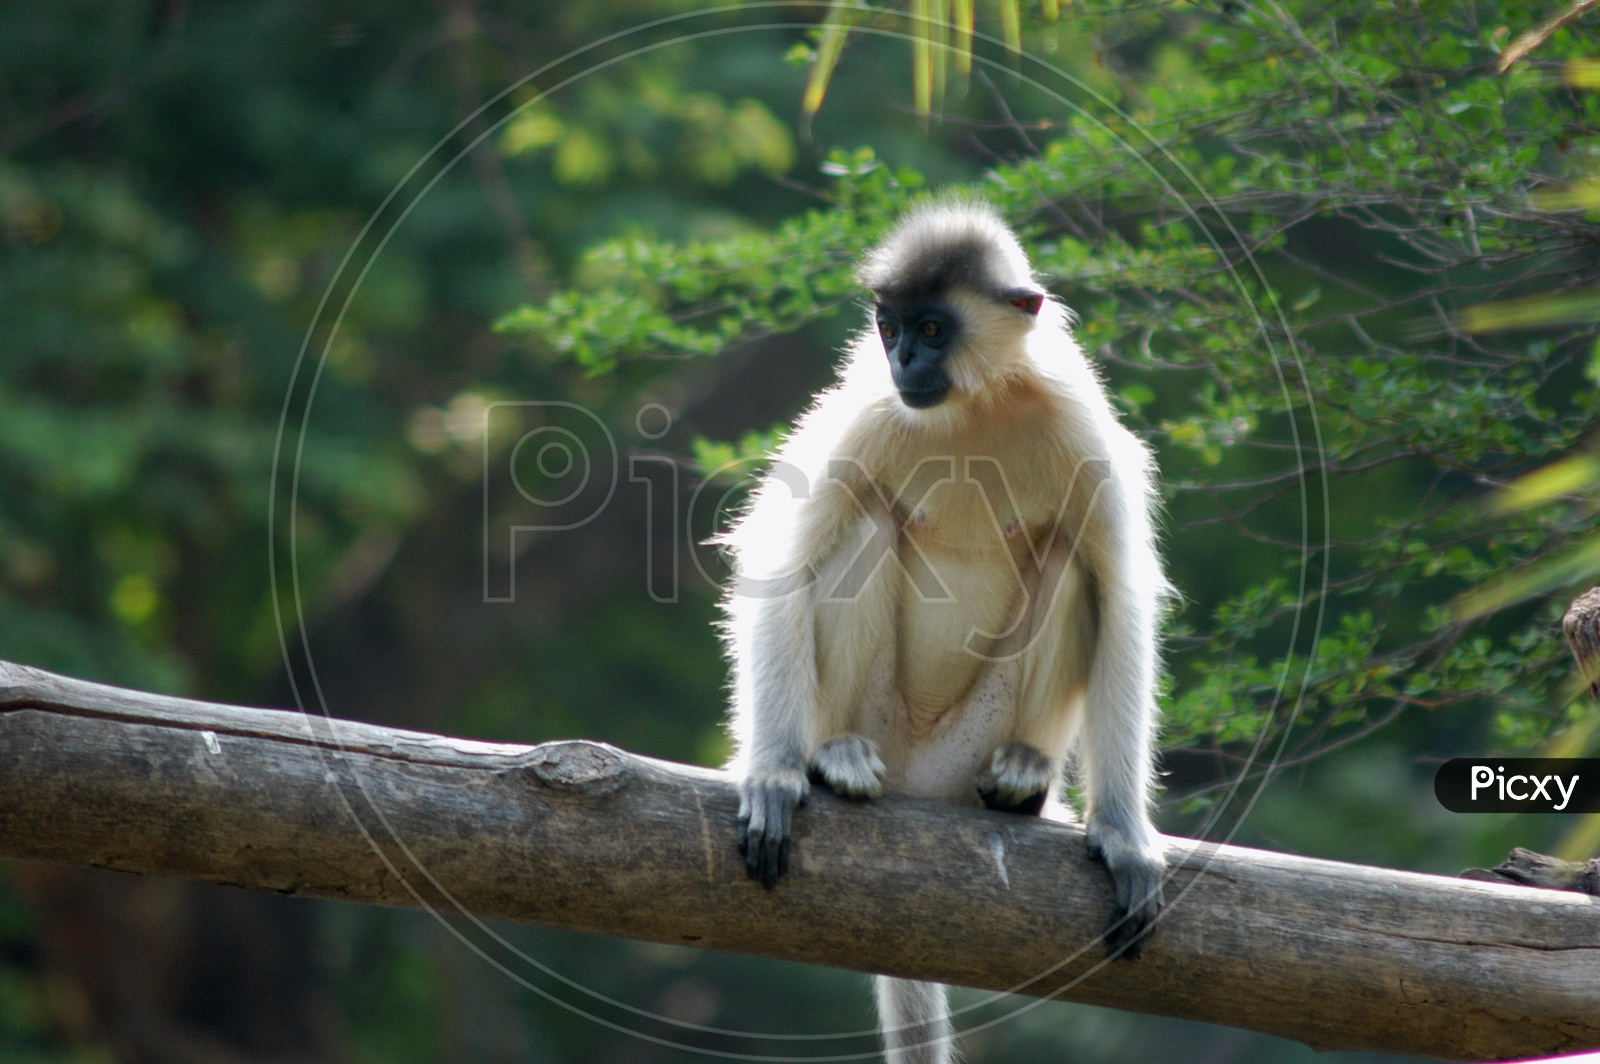 A Gibbon sitting on the wooden log